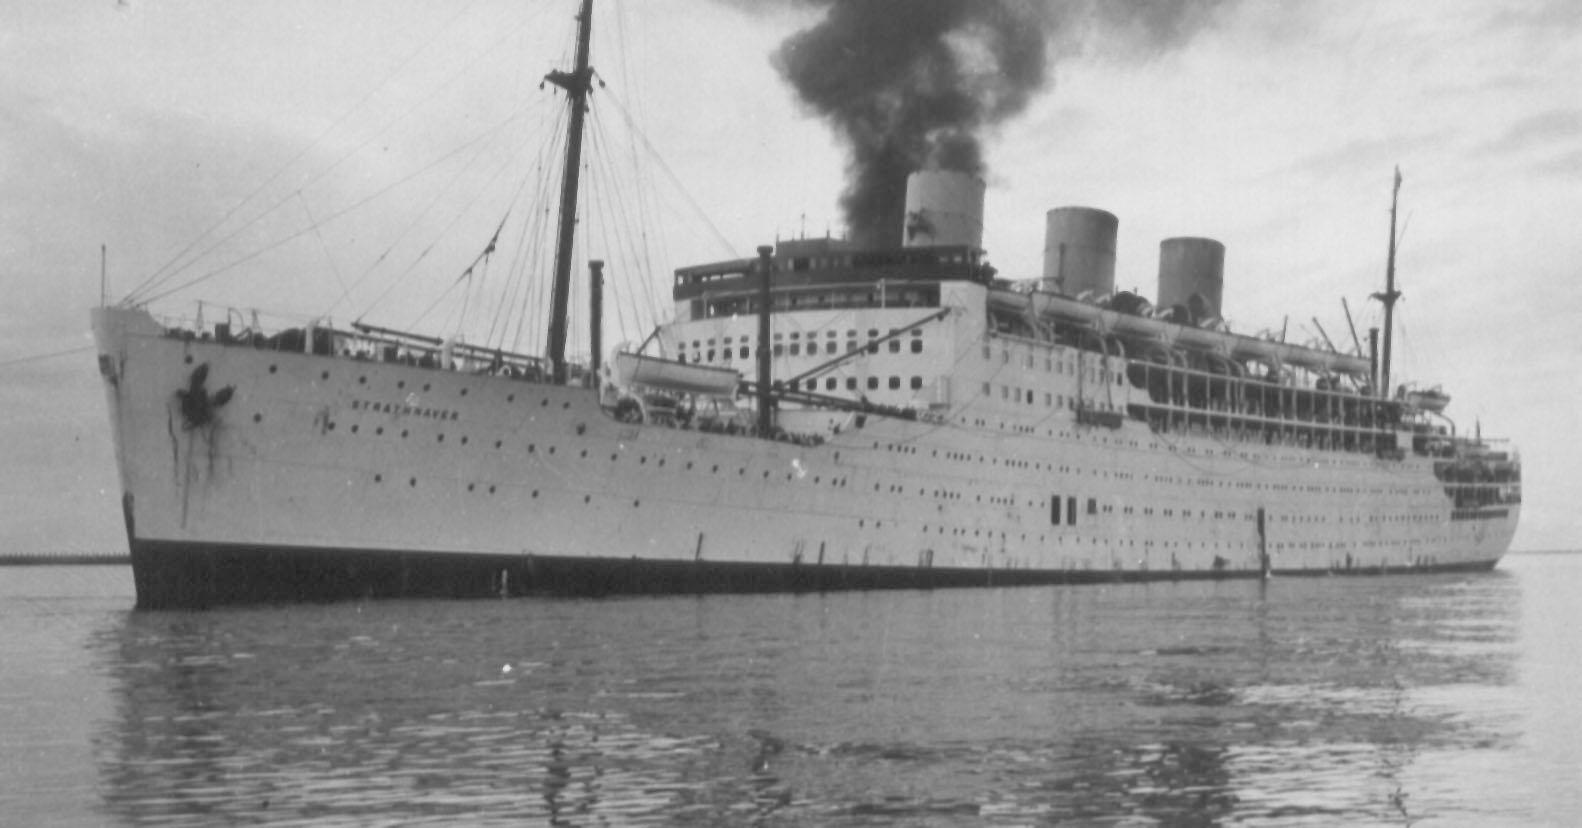 Passenger vessel "Strathnaver", built by Vickers-Armstrong Ltd, Barrow-In-Furness, England.  Launched on 5 February 1931 by Lady Bailey and completed in September 1931.
Inaugural Voyage:  2 October 1931 (London - Sydney)
Base Port:  London
Gross Tonnag